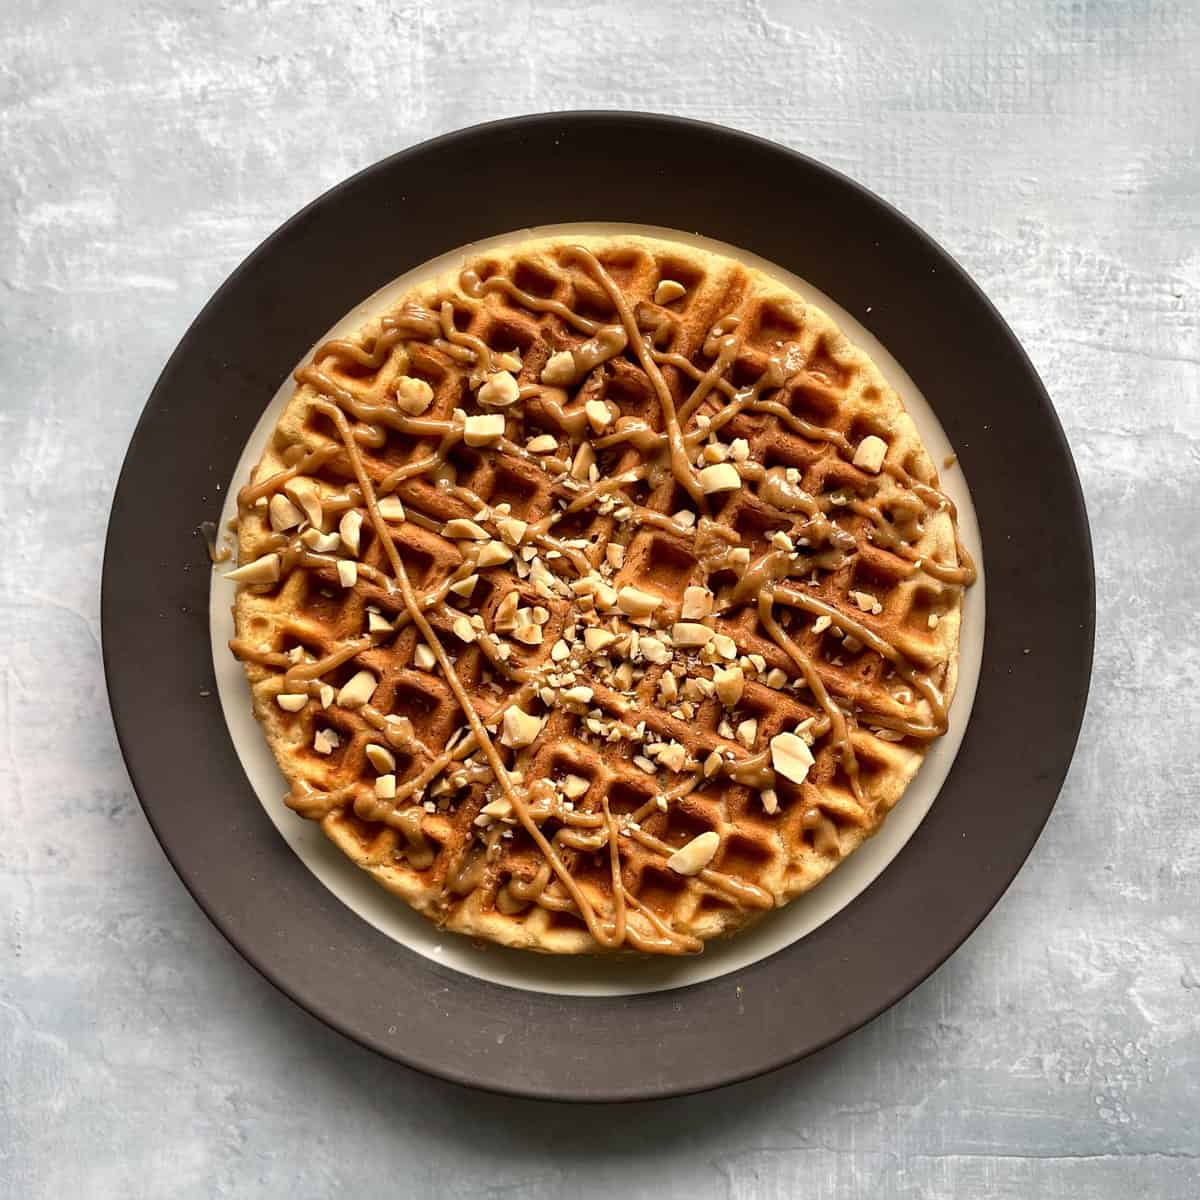 Peanut Butter Waffles with Warm Peanut Butter Syrup